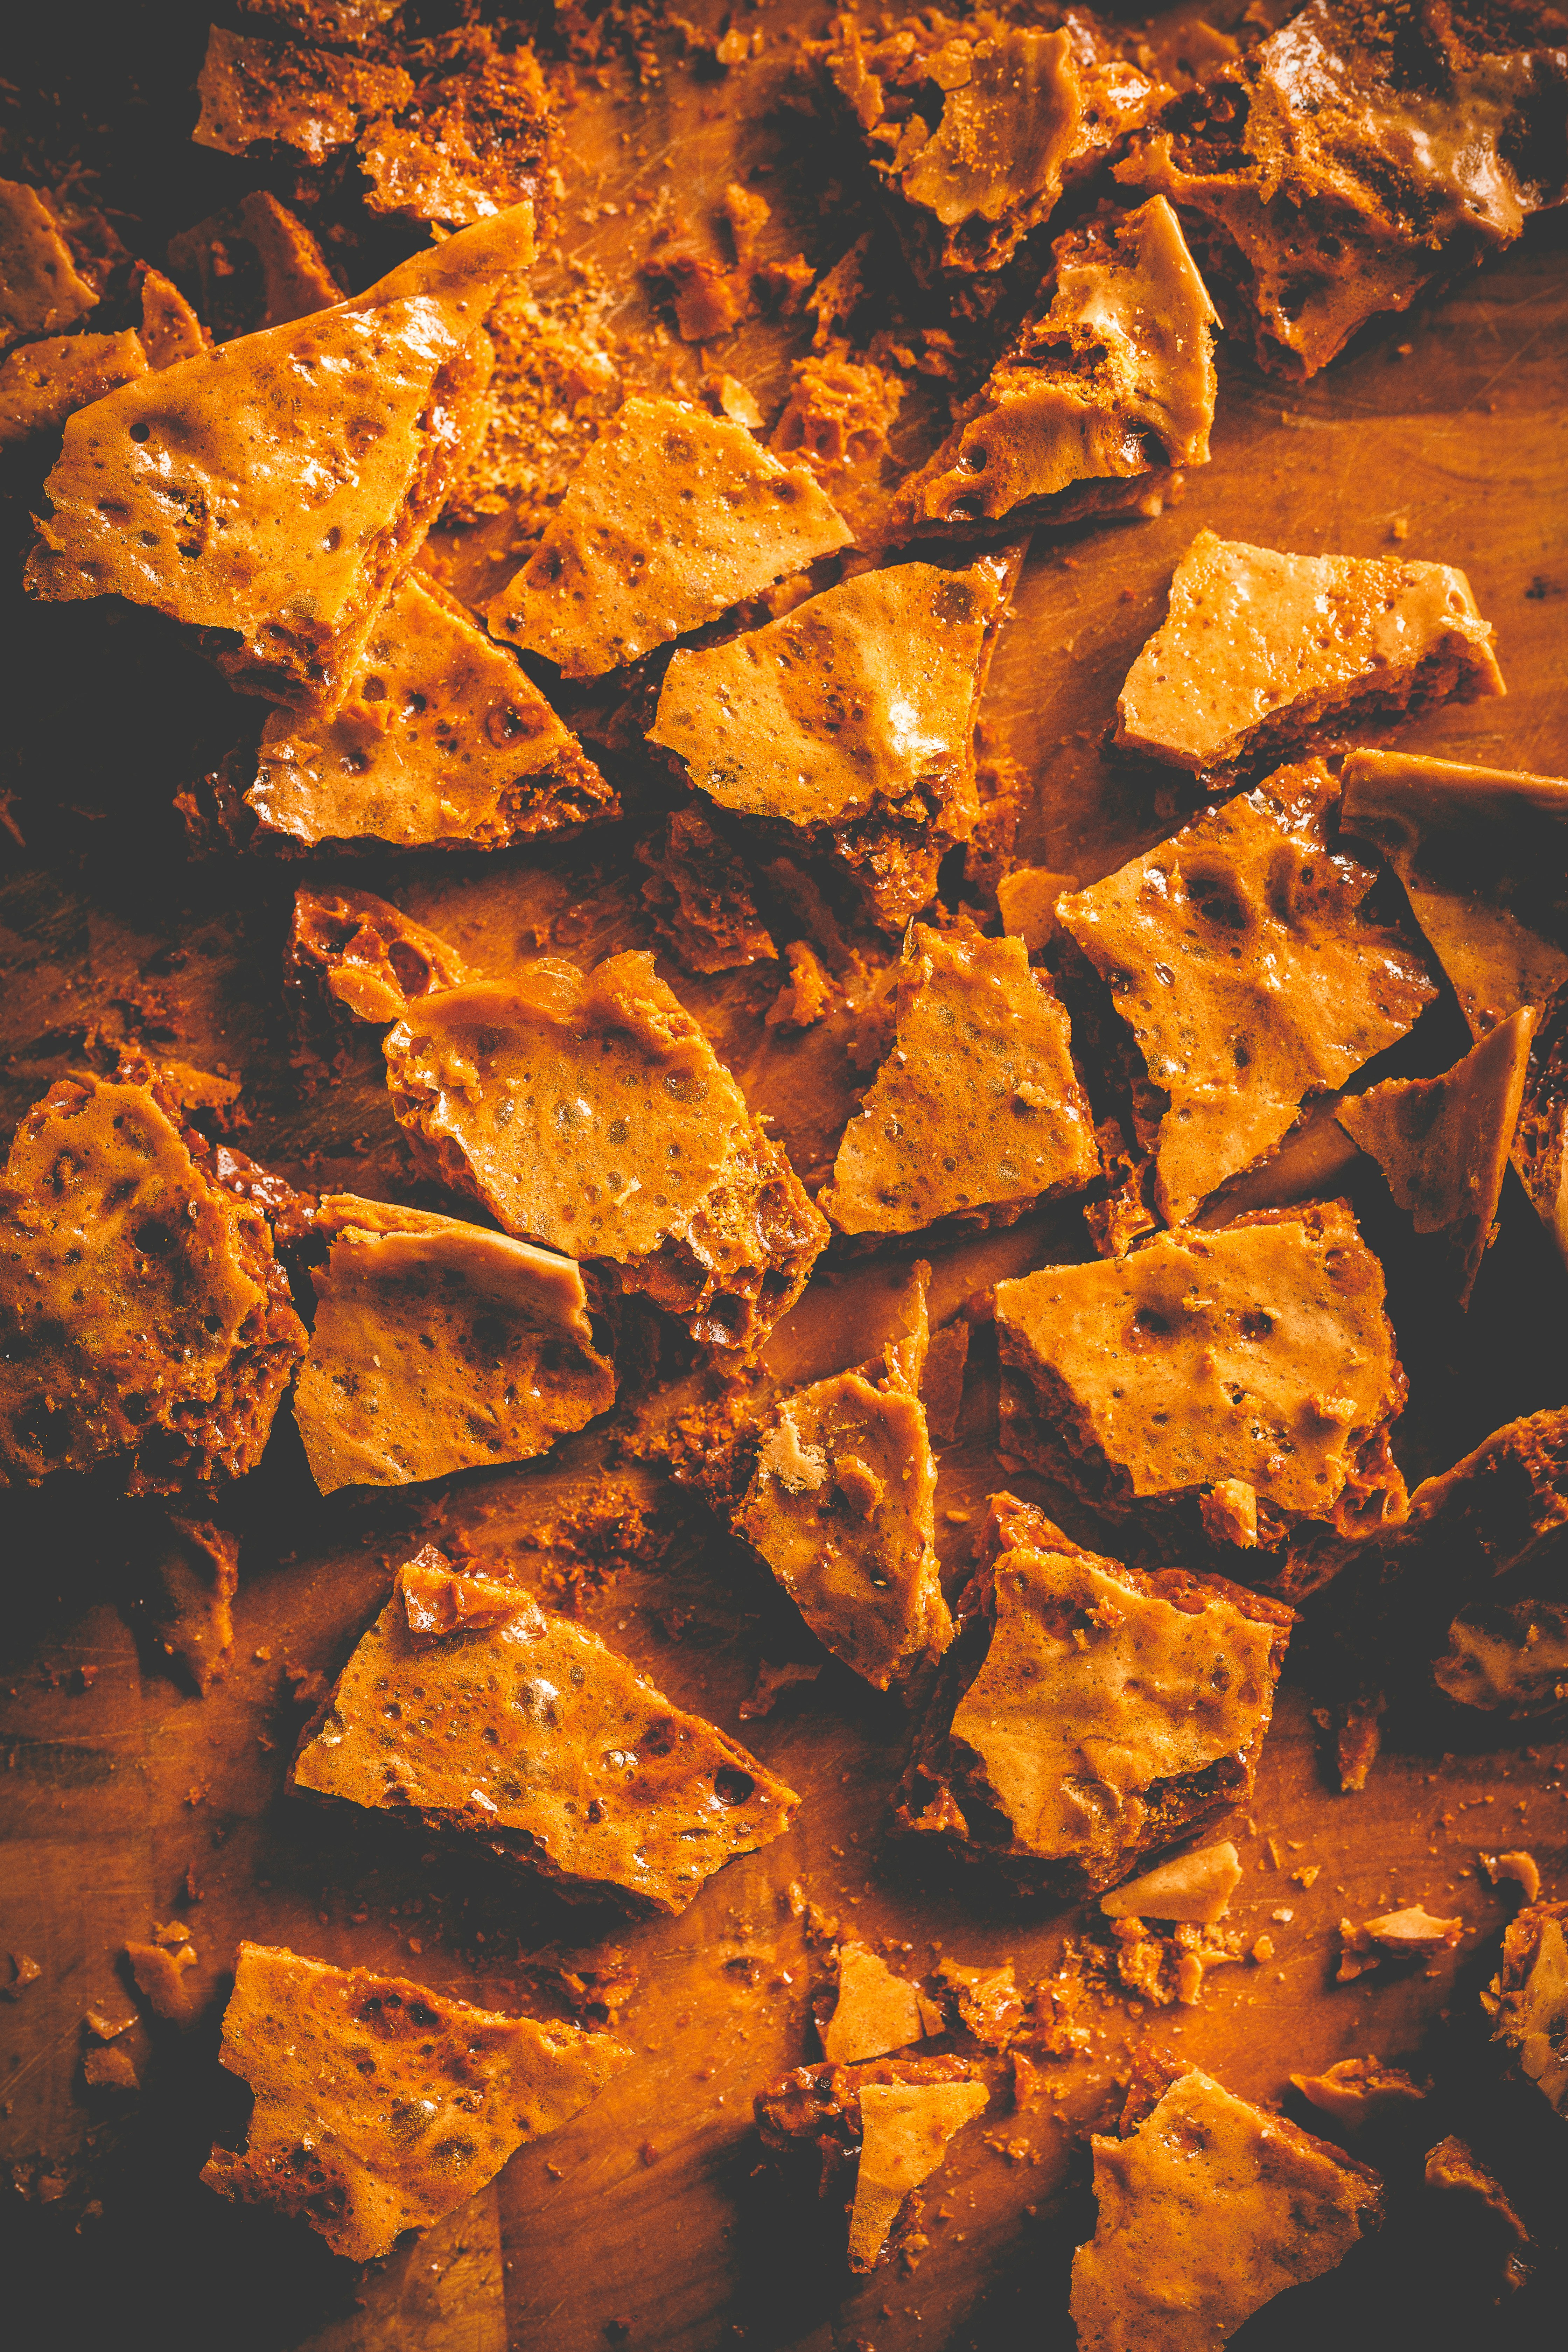 Cinder toffee. Or honeycomb. (Either way it'll stick your teeth together.) 